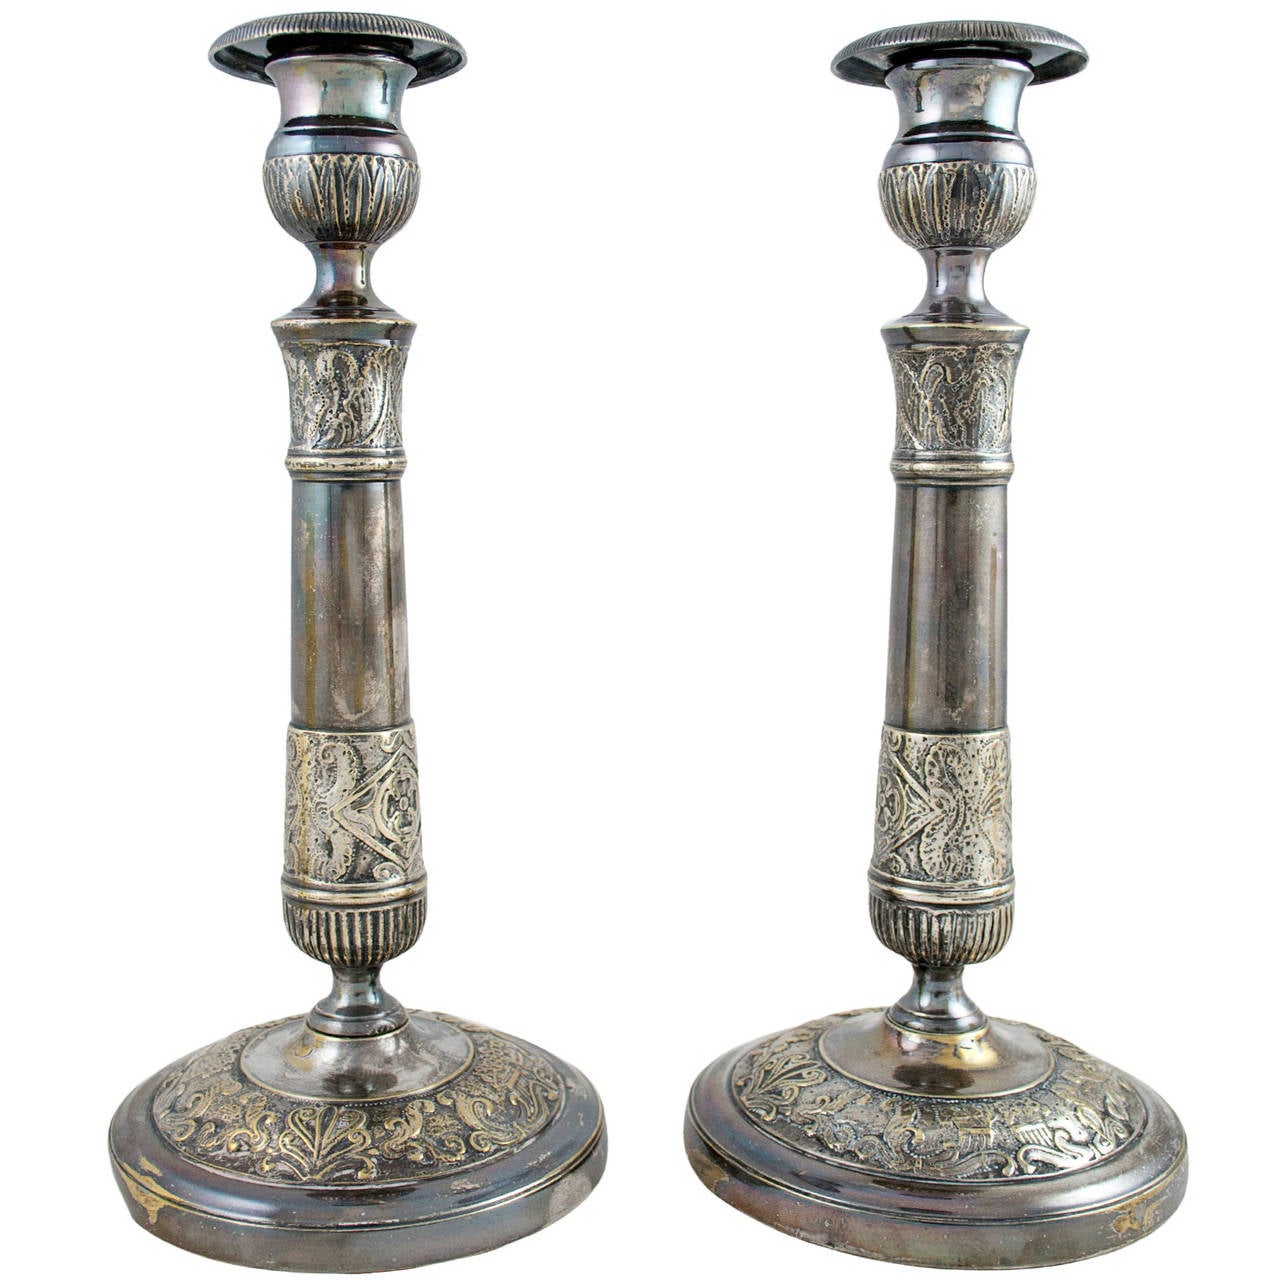 A lovely pair of mid 19th century Empire style candlesticks with Palmette details.